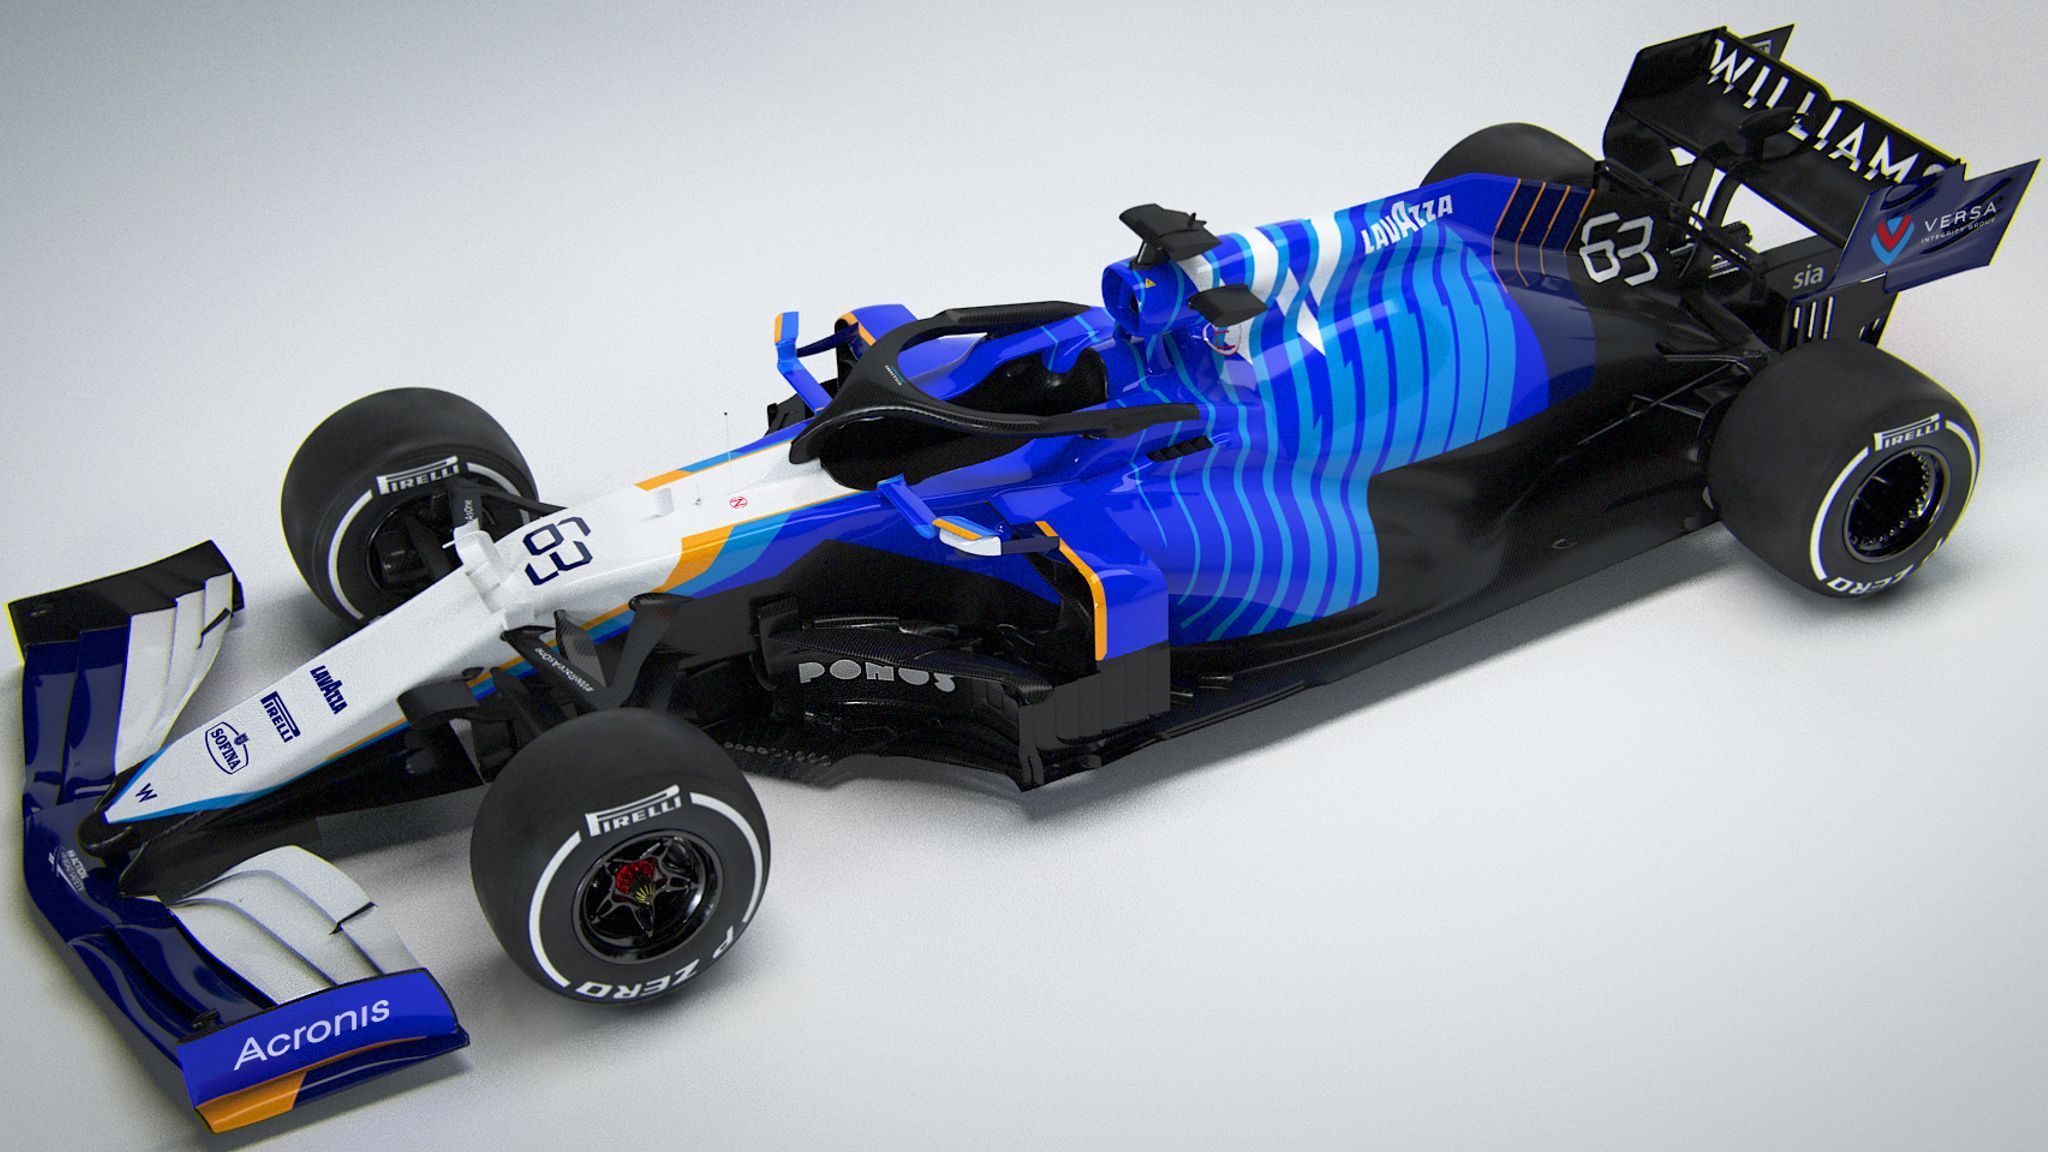 Williams reveal new look for F1 2021 with FW43B car image online after VR launch hacked